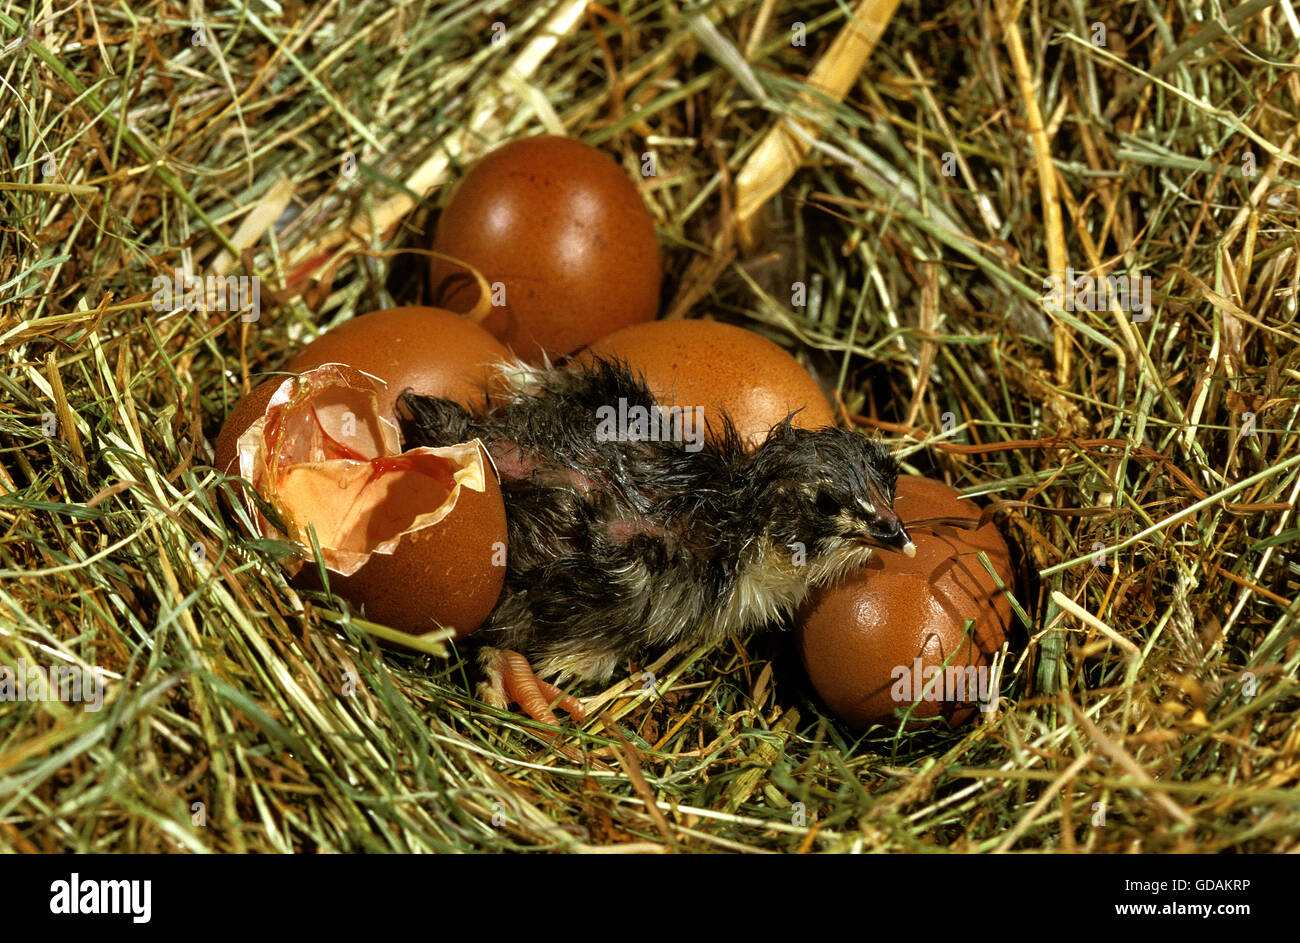 DOMESTIC CHICKEN, CHICK HATCHING FROM EGG Stock Photo